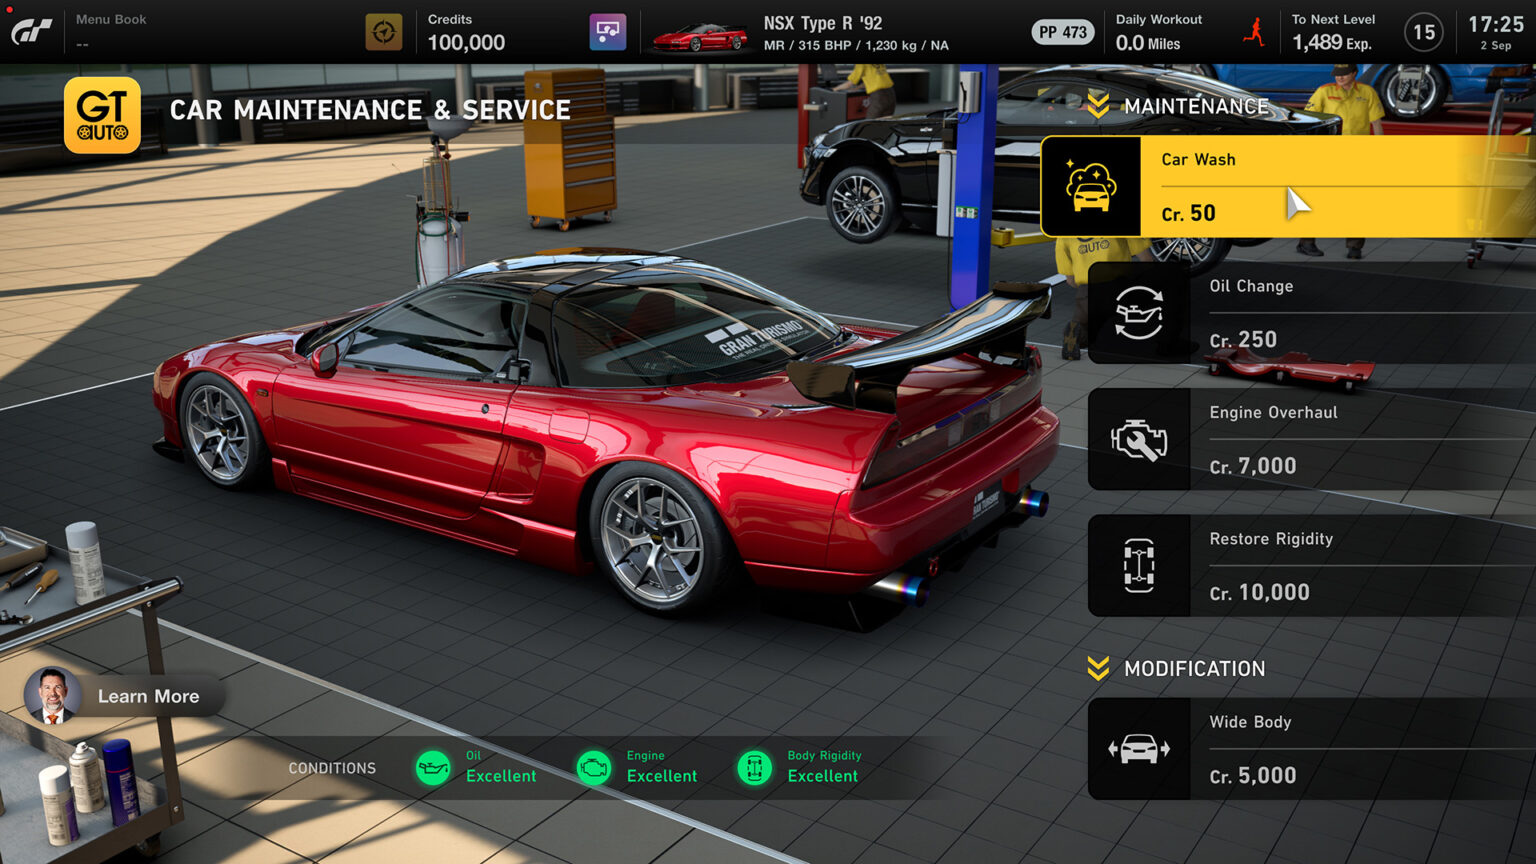 Gran Turismo 7’s New Features Detailed Used Cars, Body Upgrades